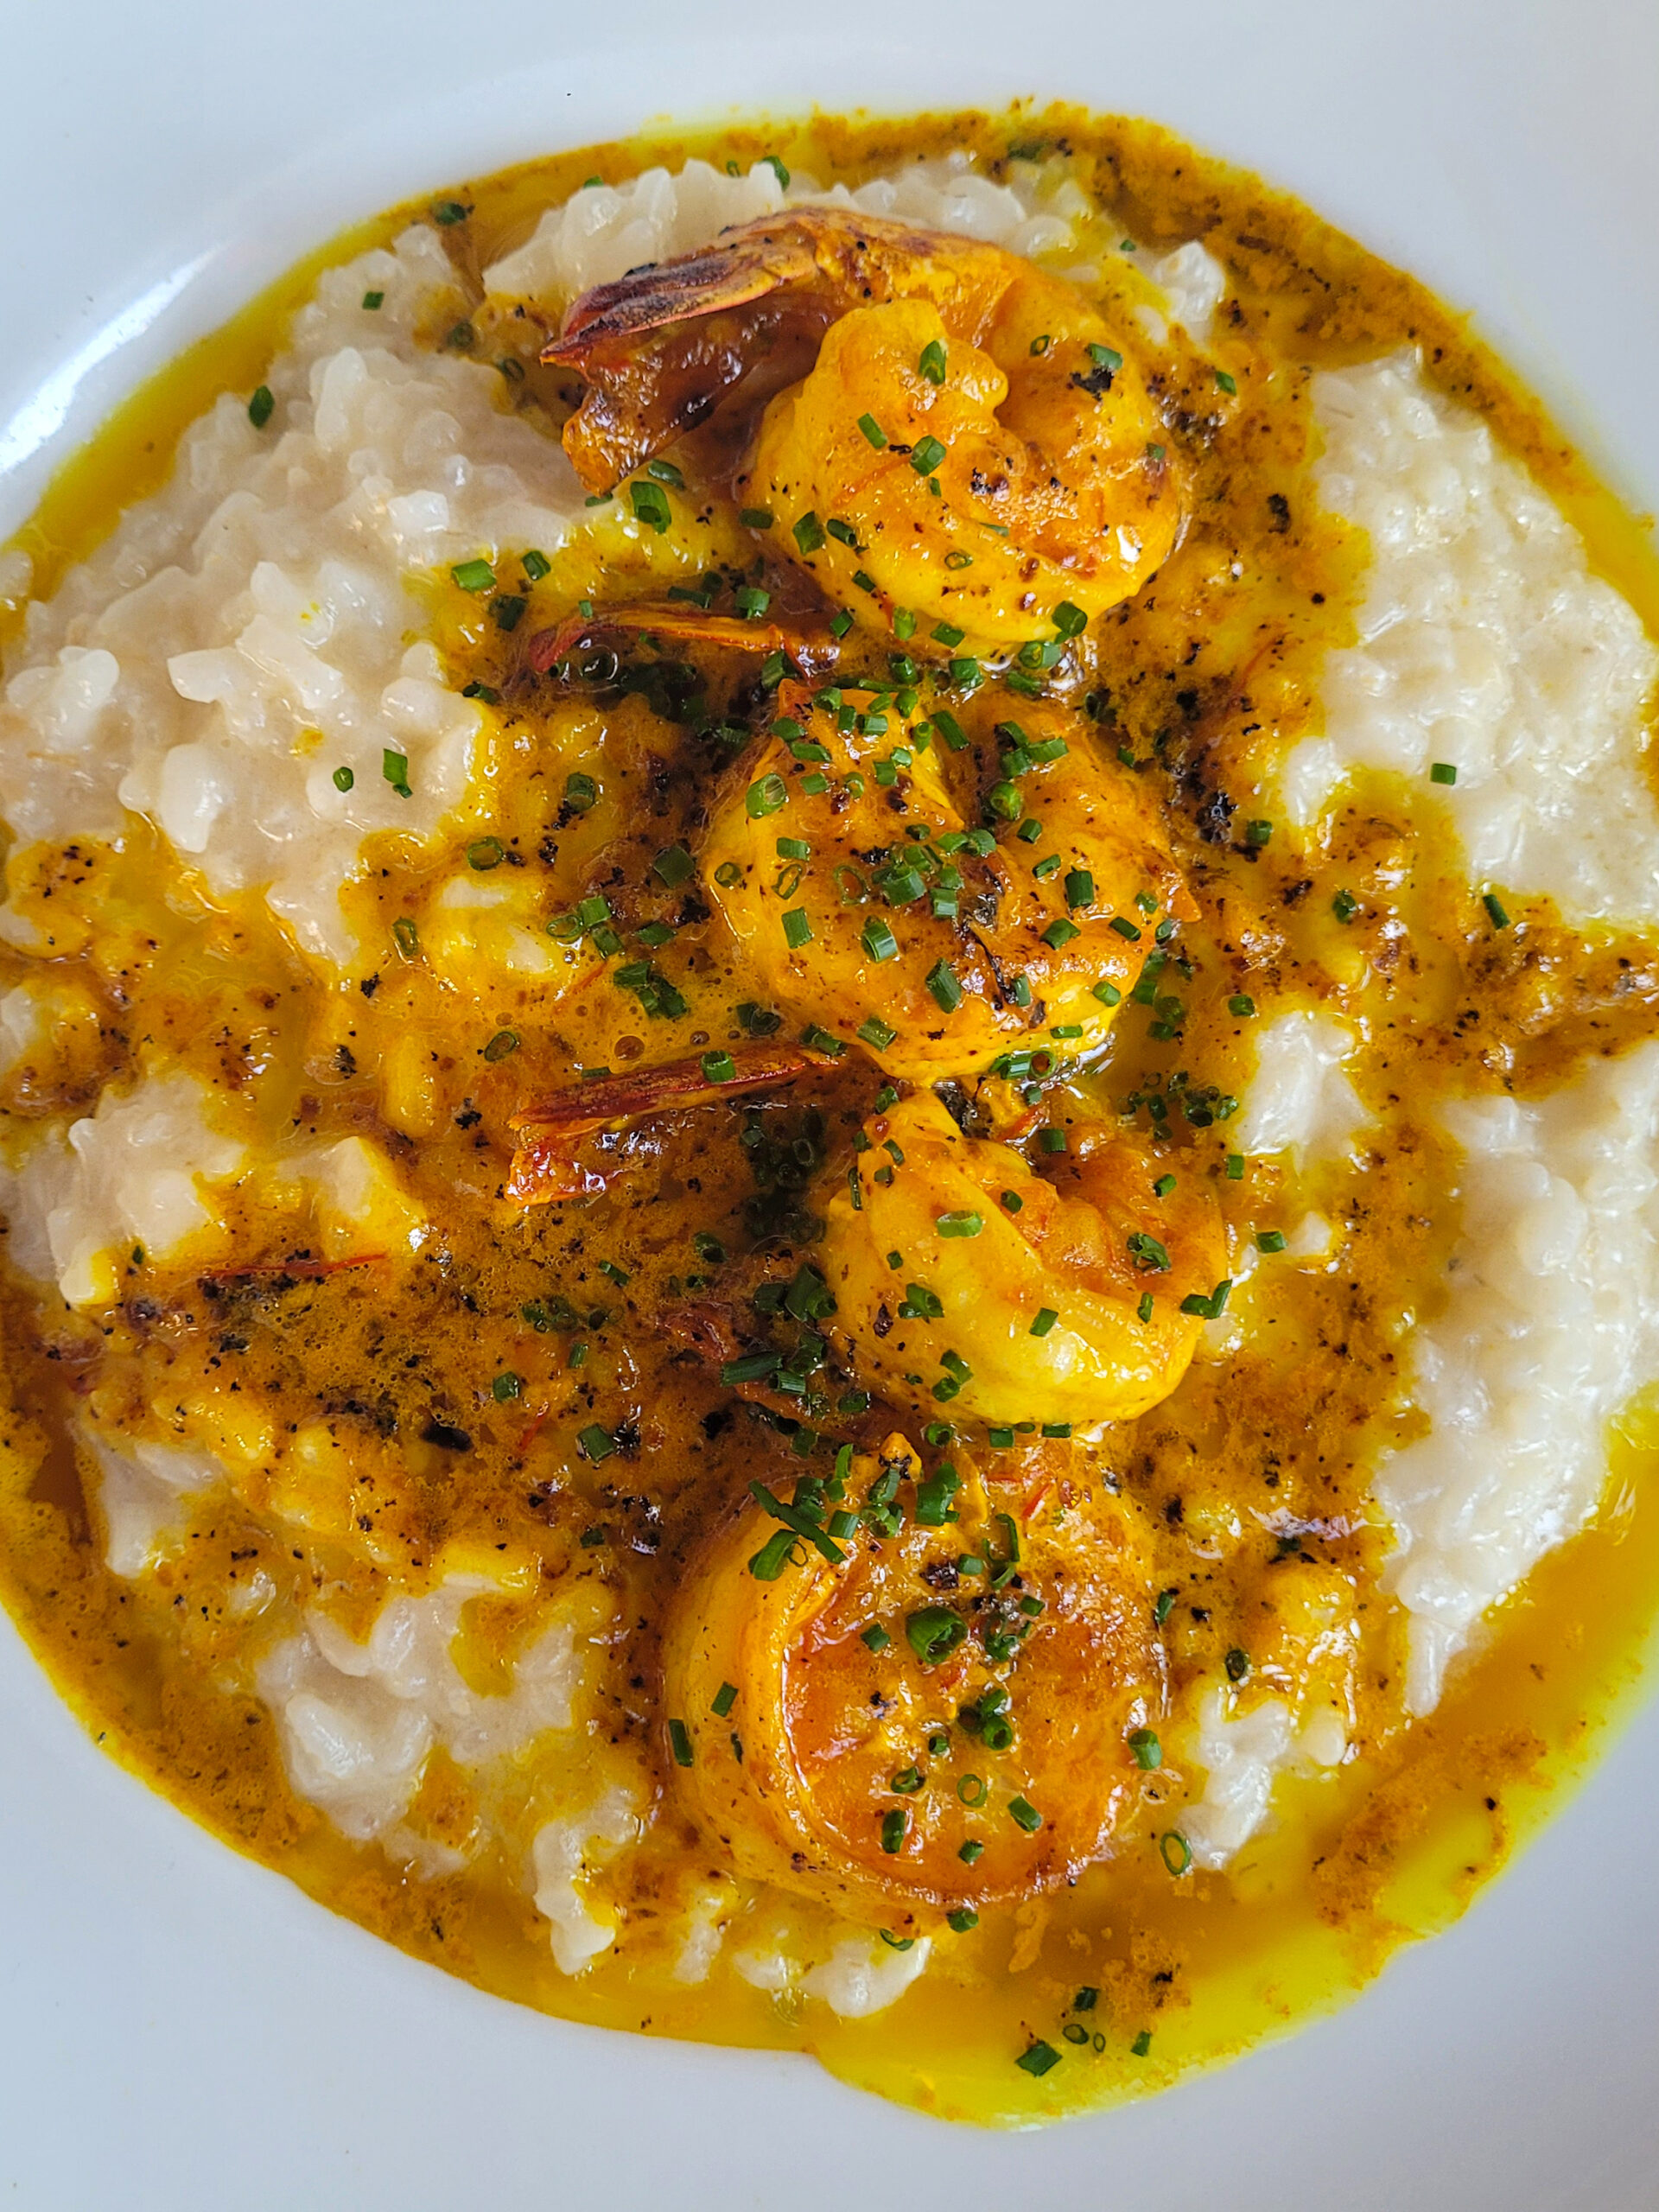 Shrimp and Saffron Risotto is served at Grata Italian Eatery in Windsor. (Heather Irwin / The Press Democrat)